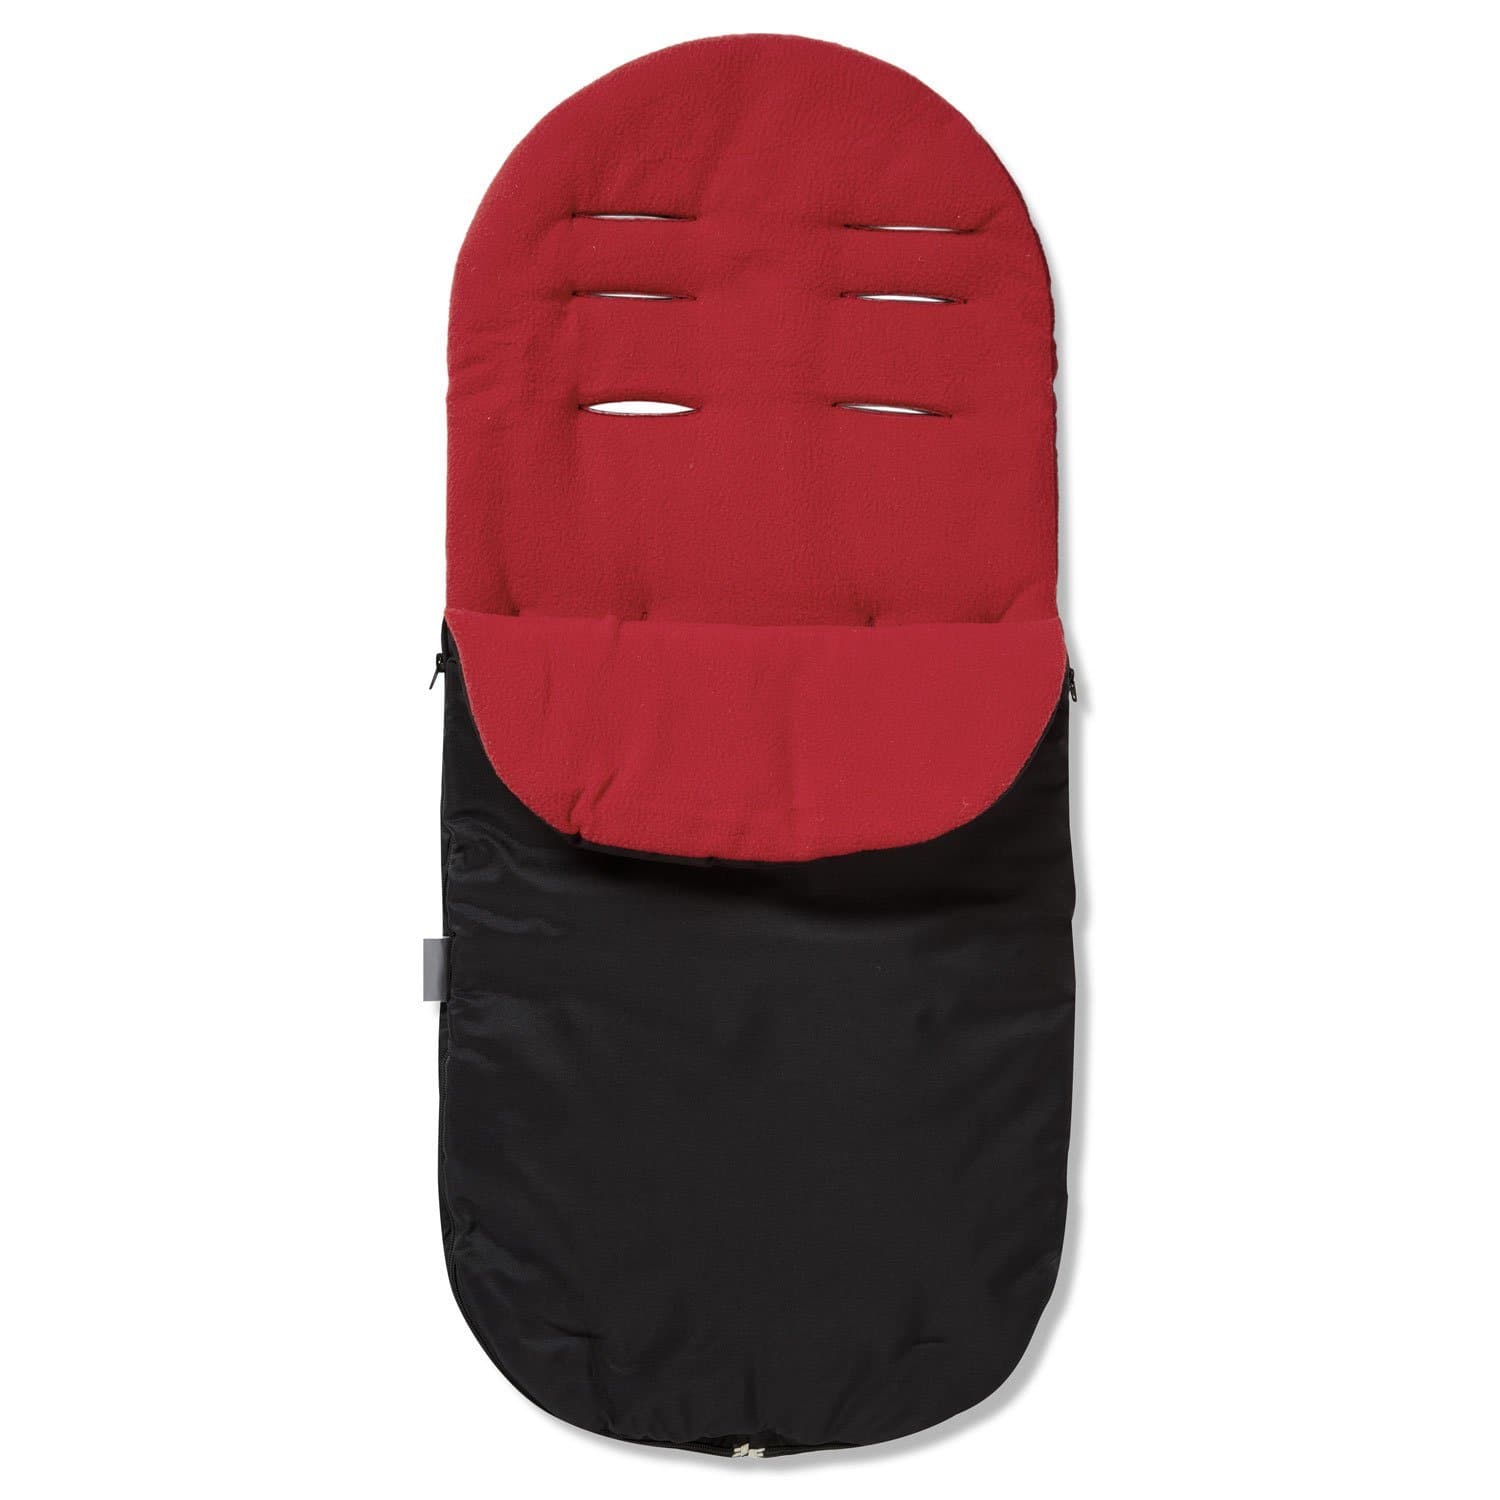 Footmuff / Cosy Toes Compatible with Chicco - Red / Fits All Models | For Your Little One